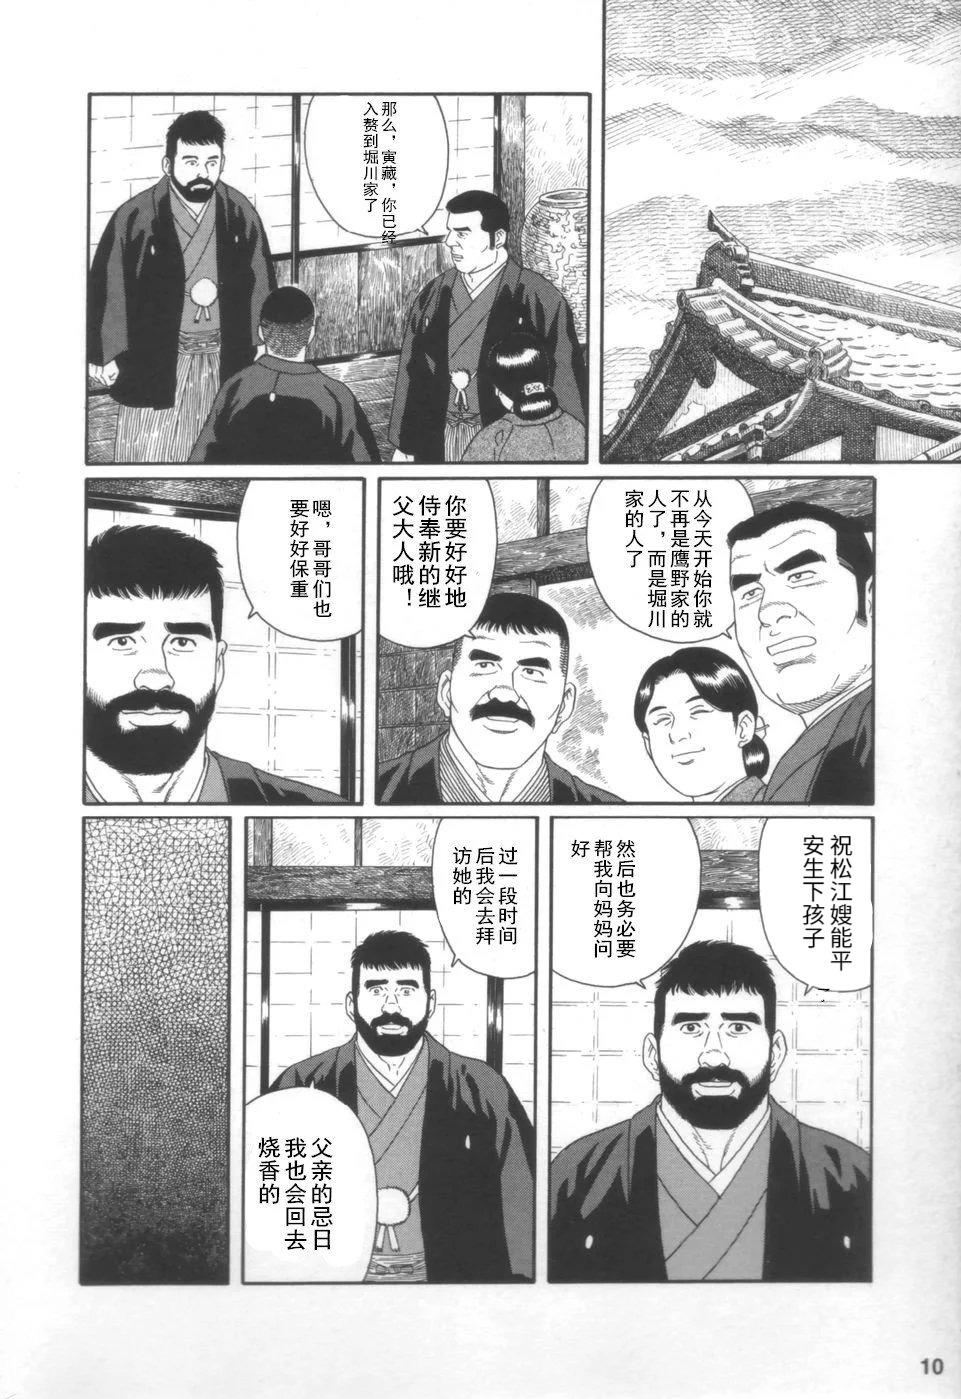 Penetration Gedou no Ie Joukan | 邪道之家 Vol. 1 Ch.1 Slapping - Page 9